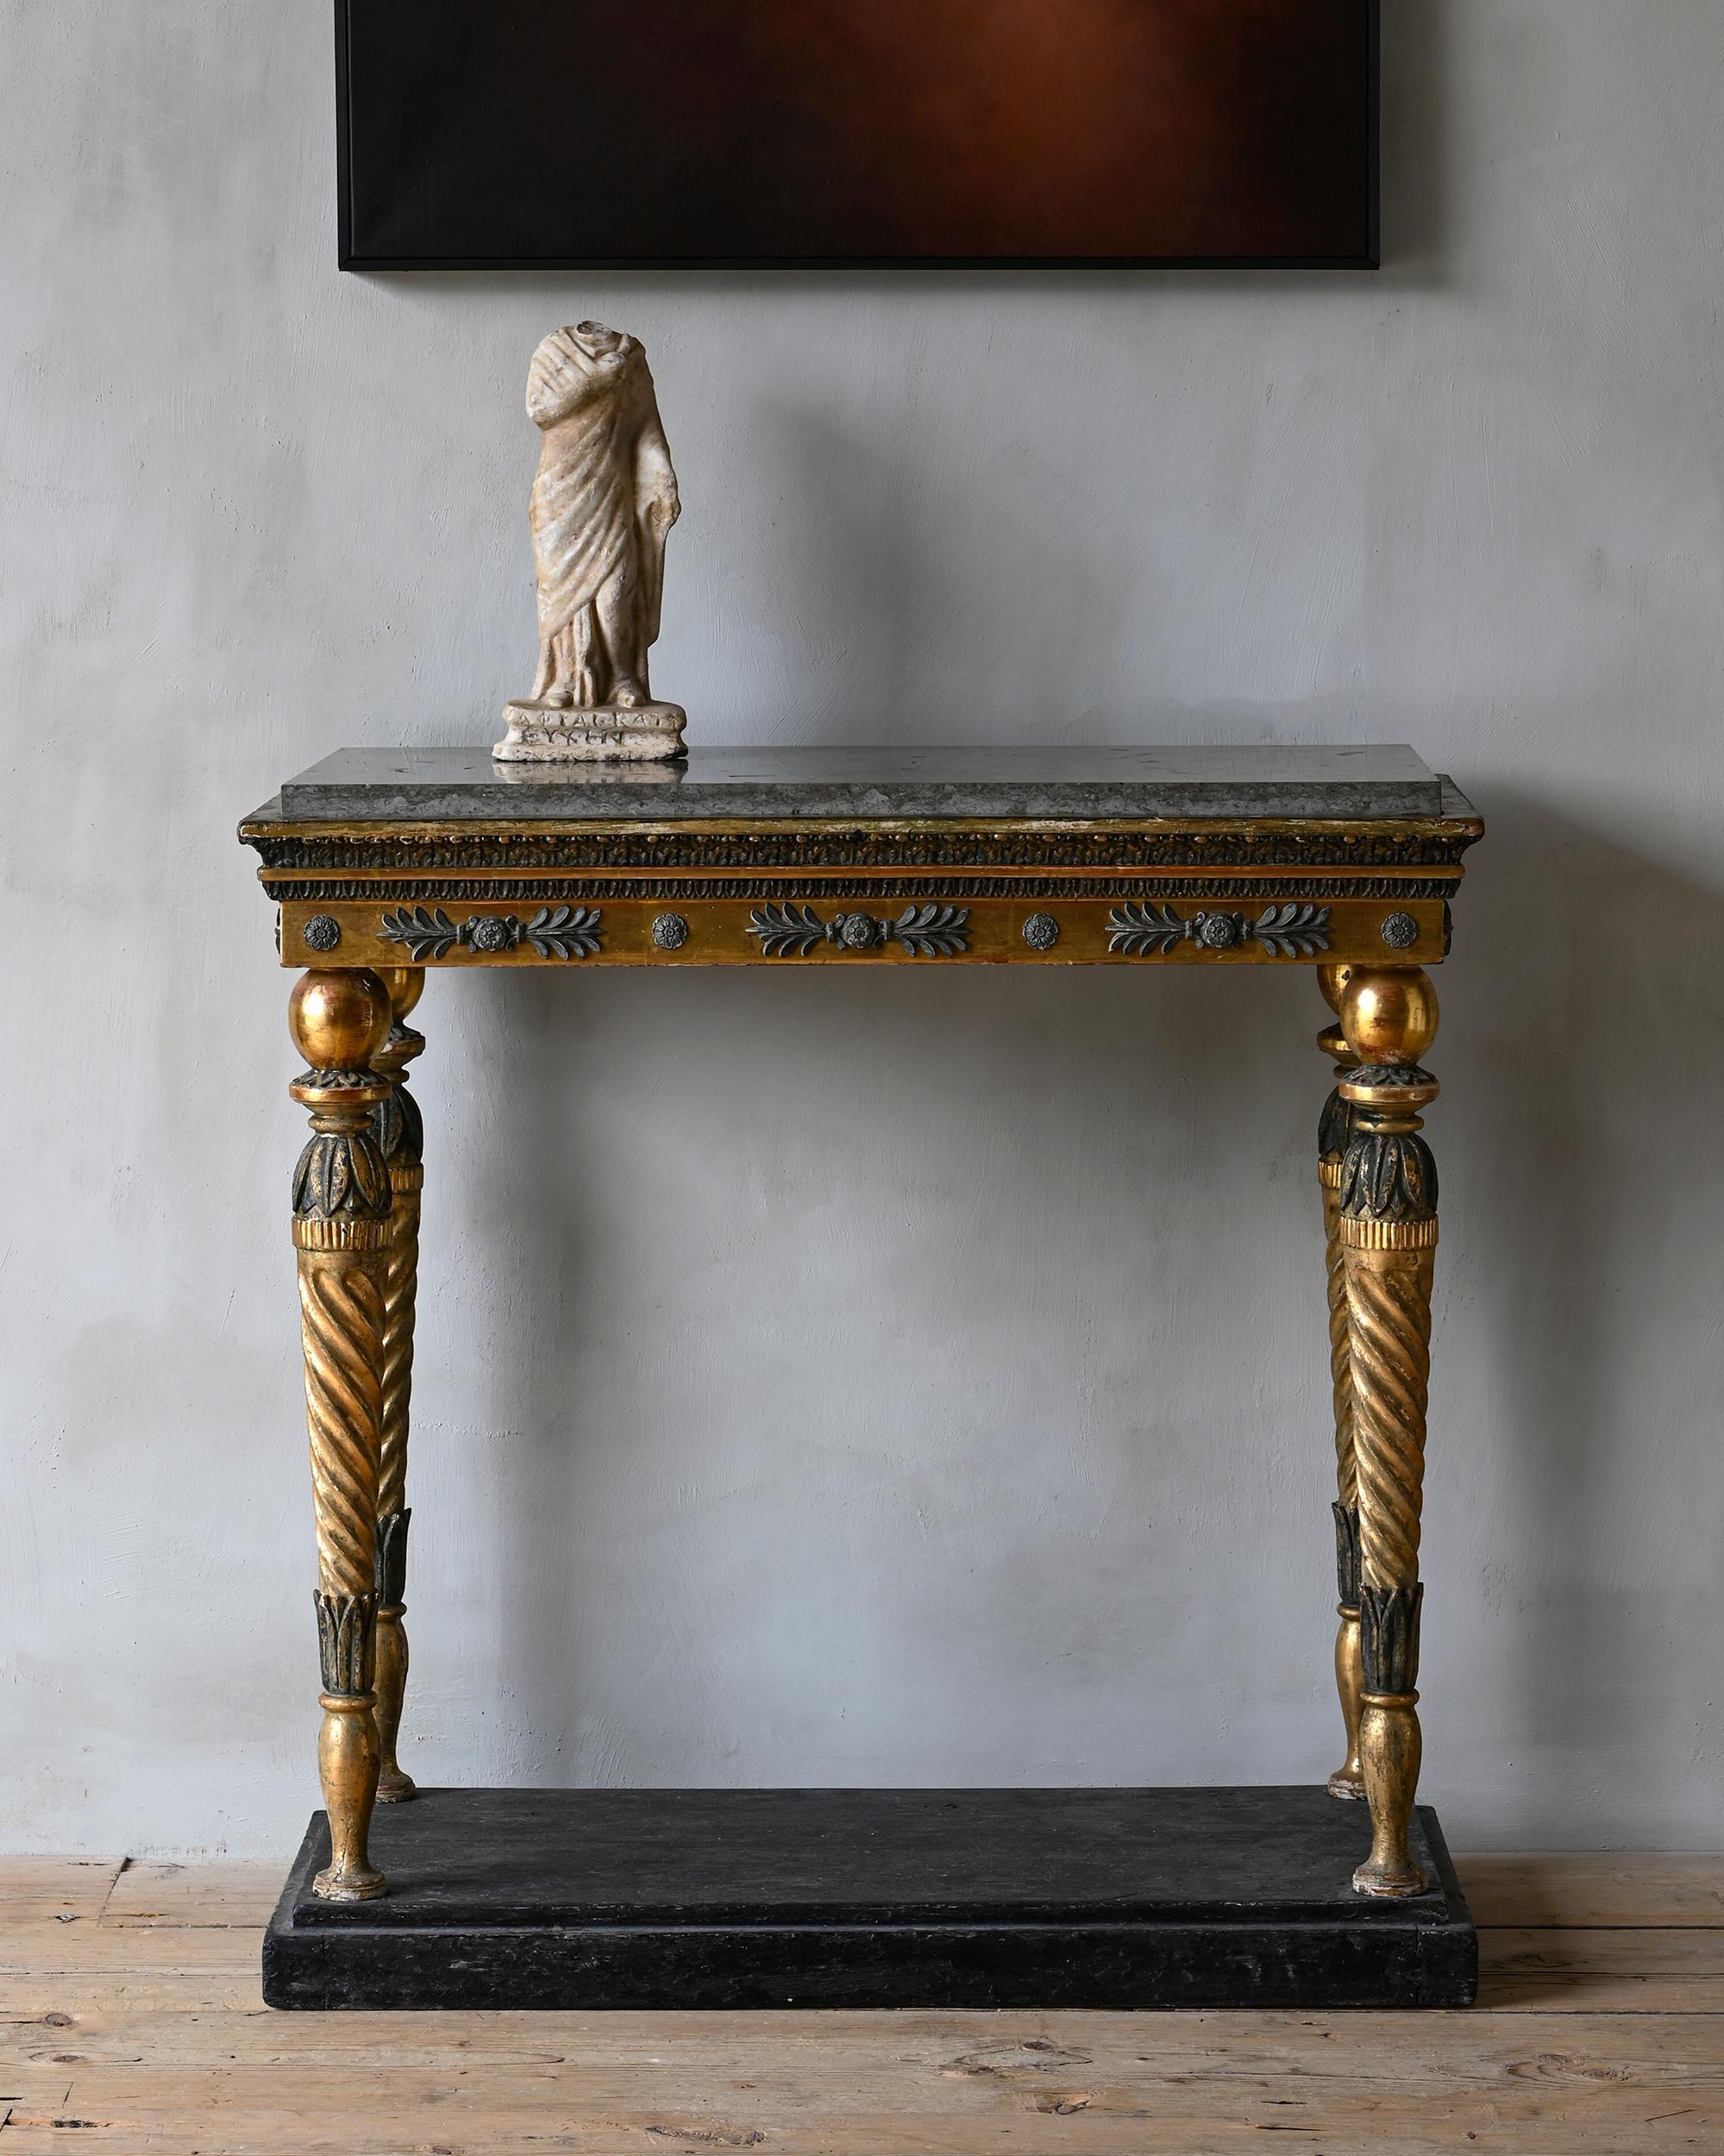 Fine 19th century Gustavian gilt wood console table with marble top. Ca 1810 Stockholm Sweden.